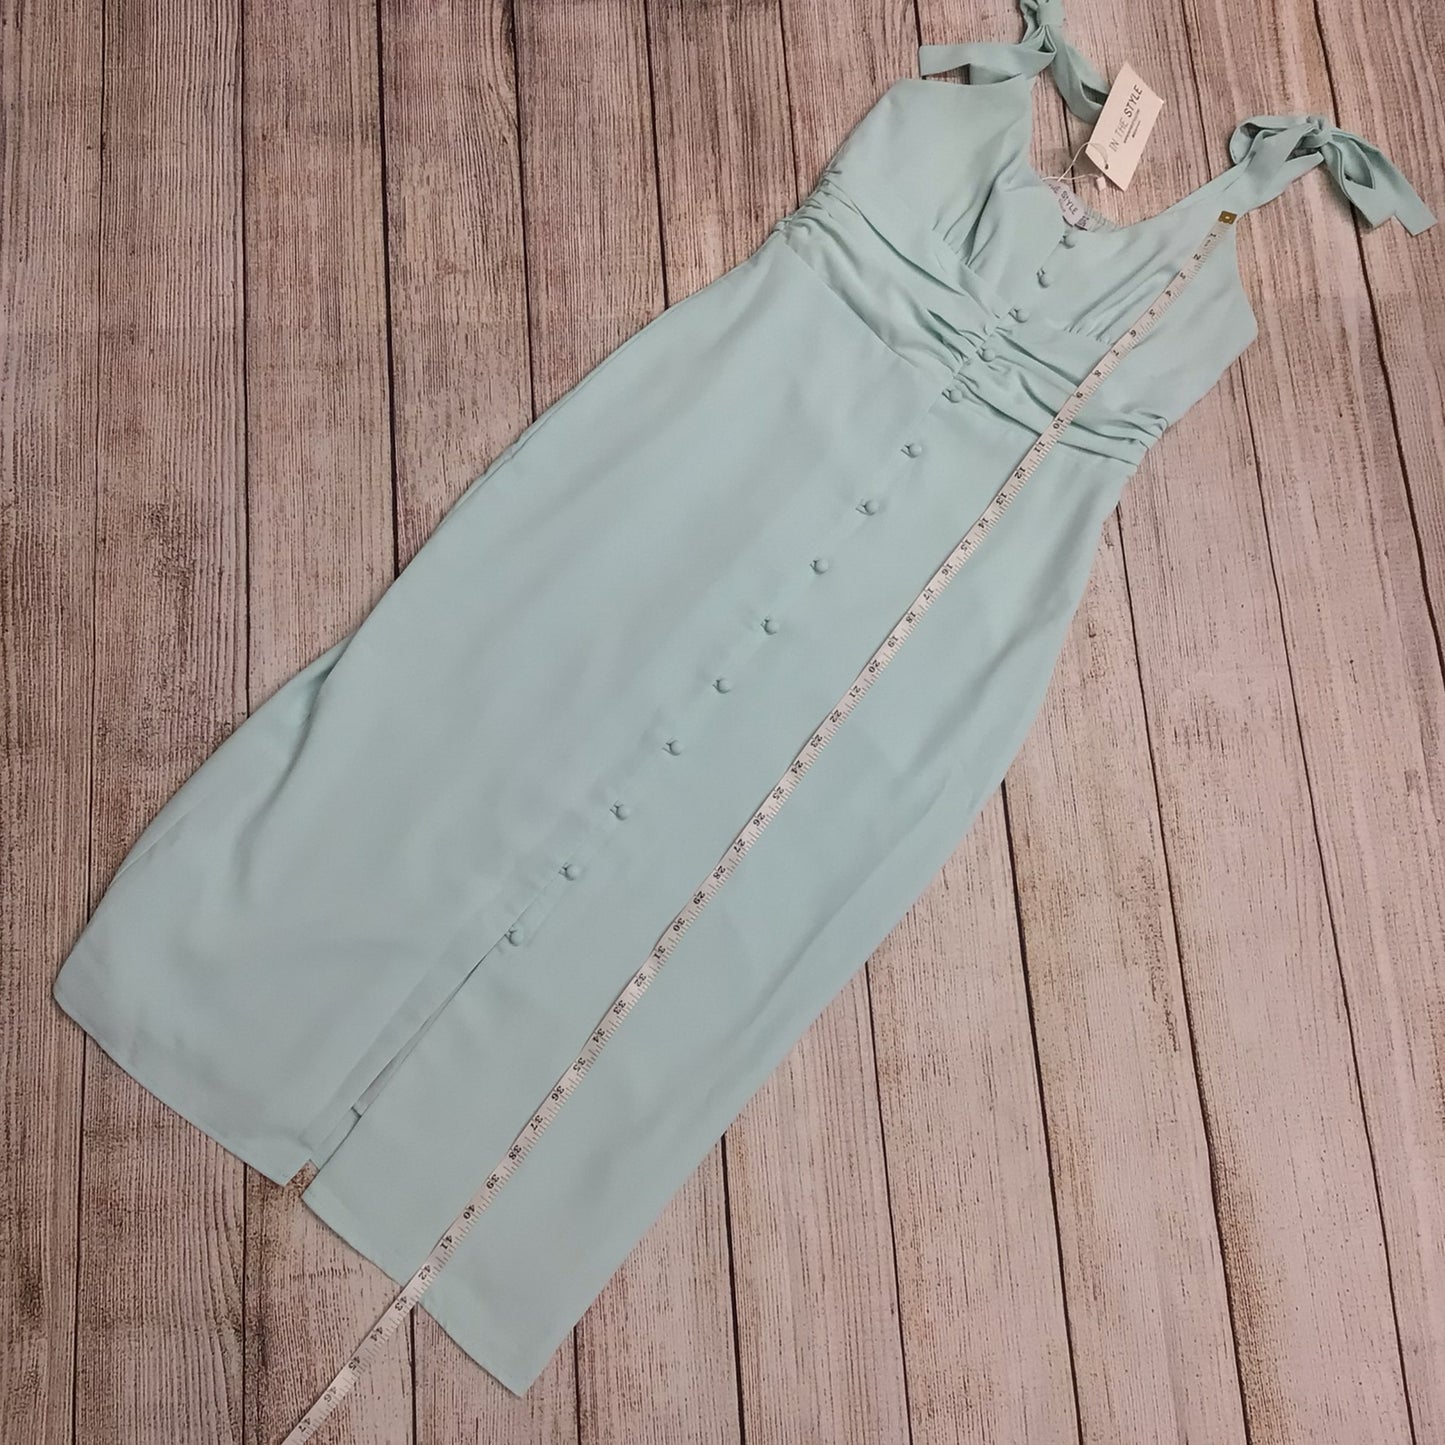 BNWT In The Style Perrie Sian Mint Green Midi Dress RRP £45 Size 10